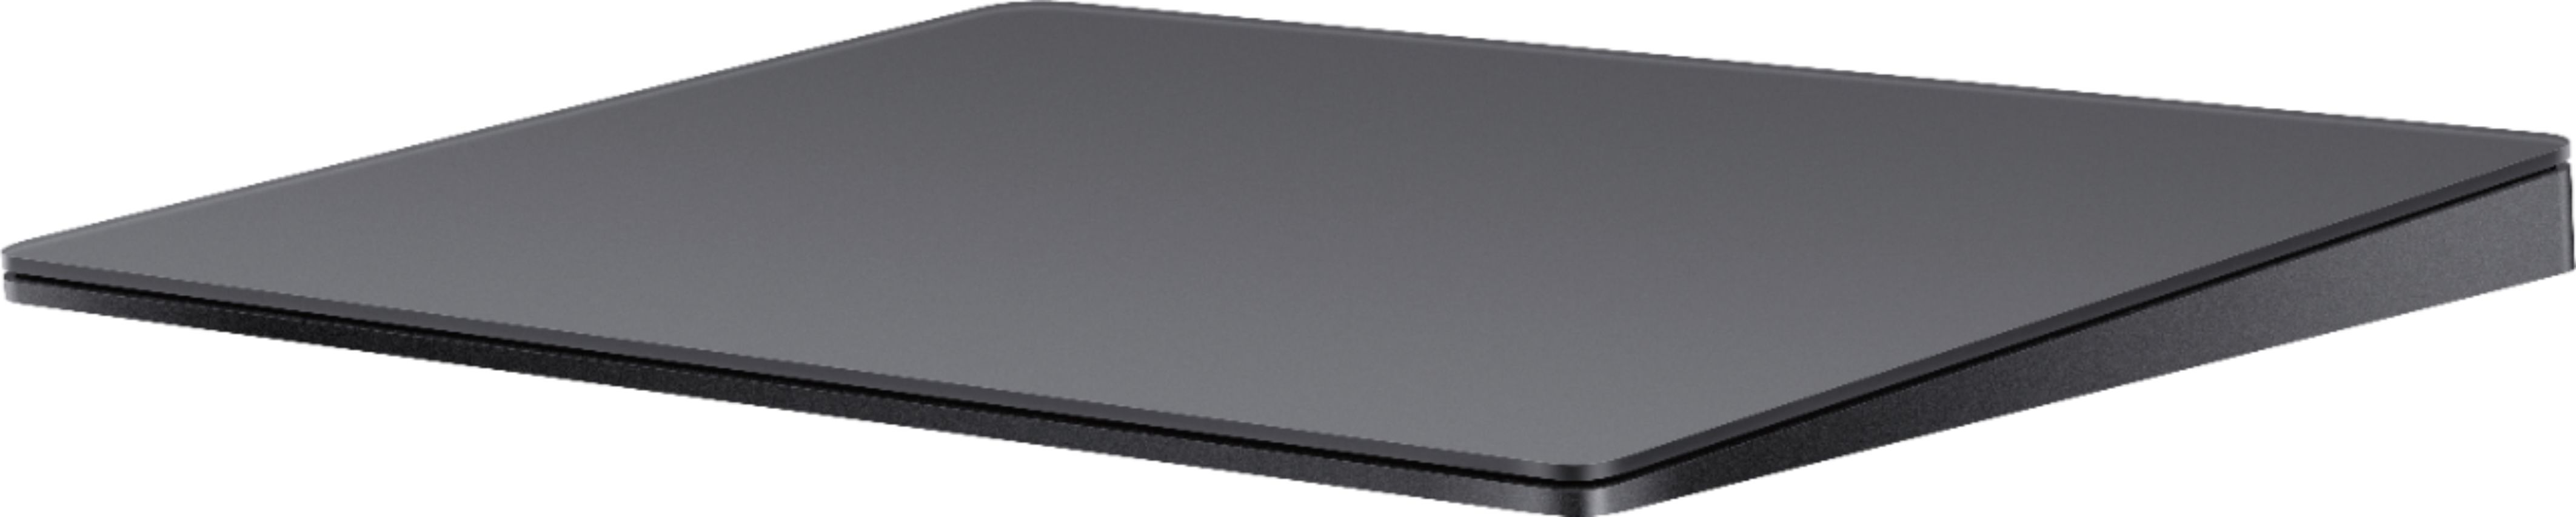 Best Buy: Apple Magic Trackpad 2 Space Gray MRMF2LL/A